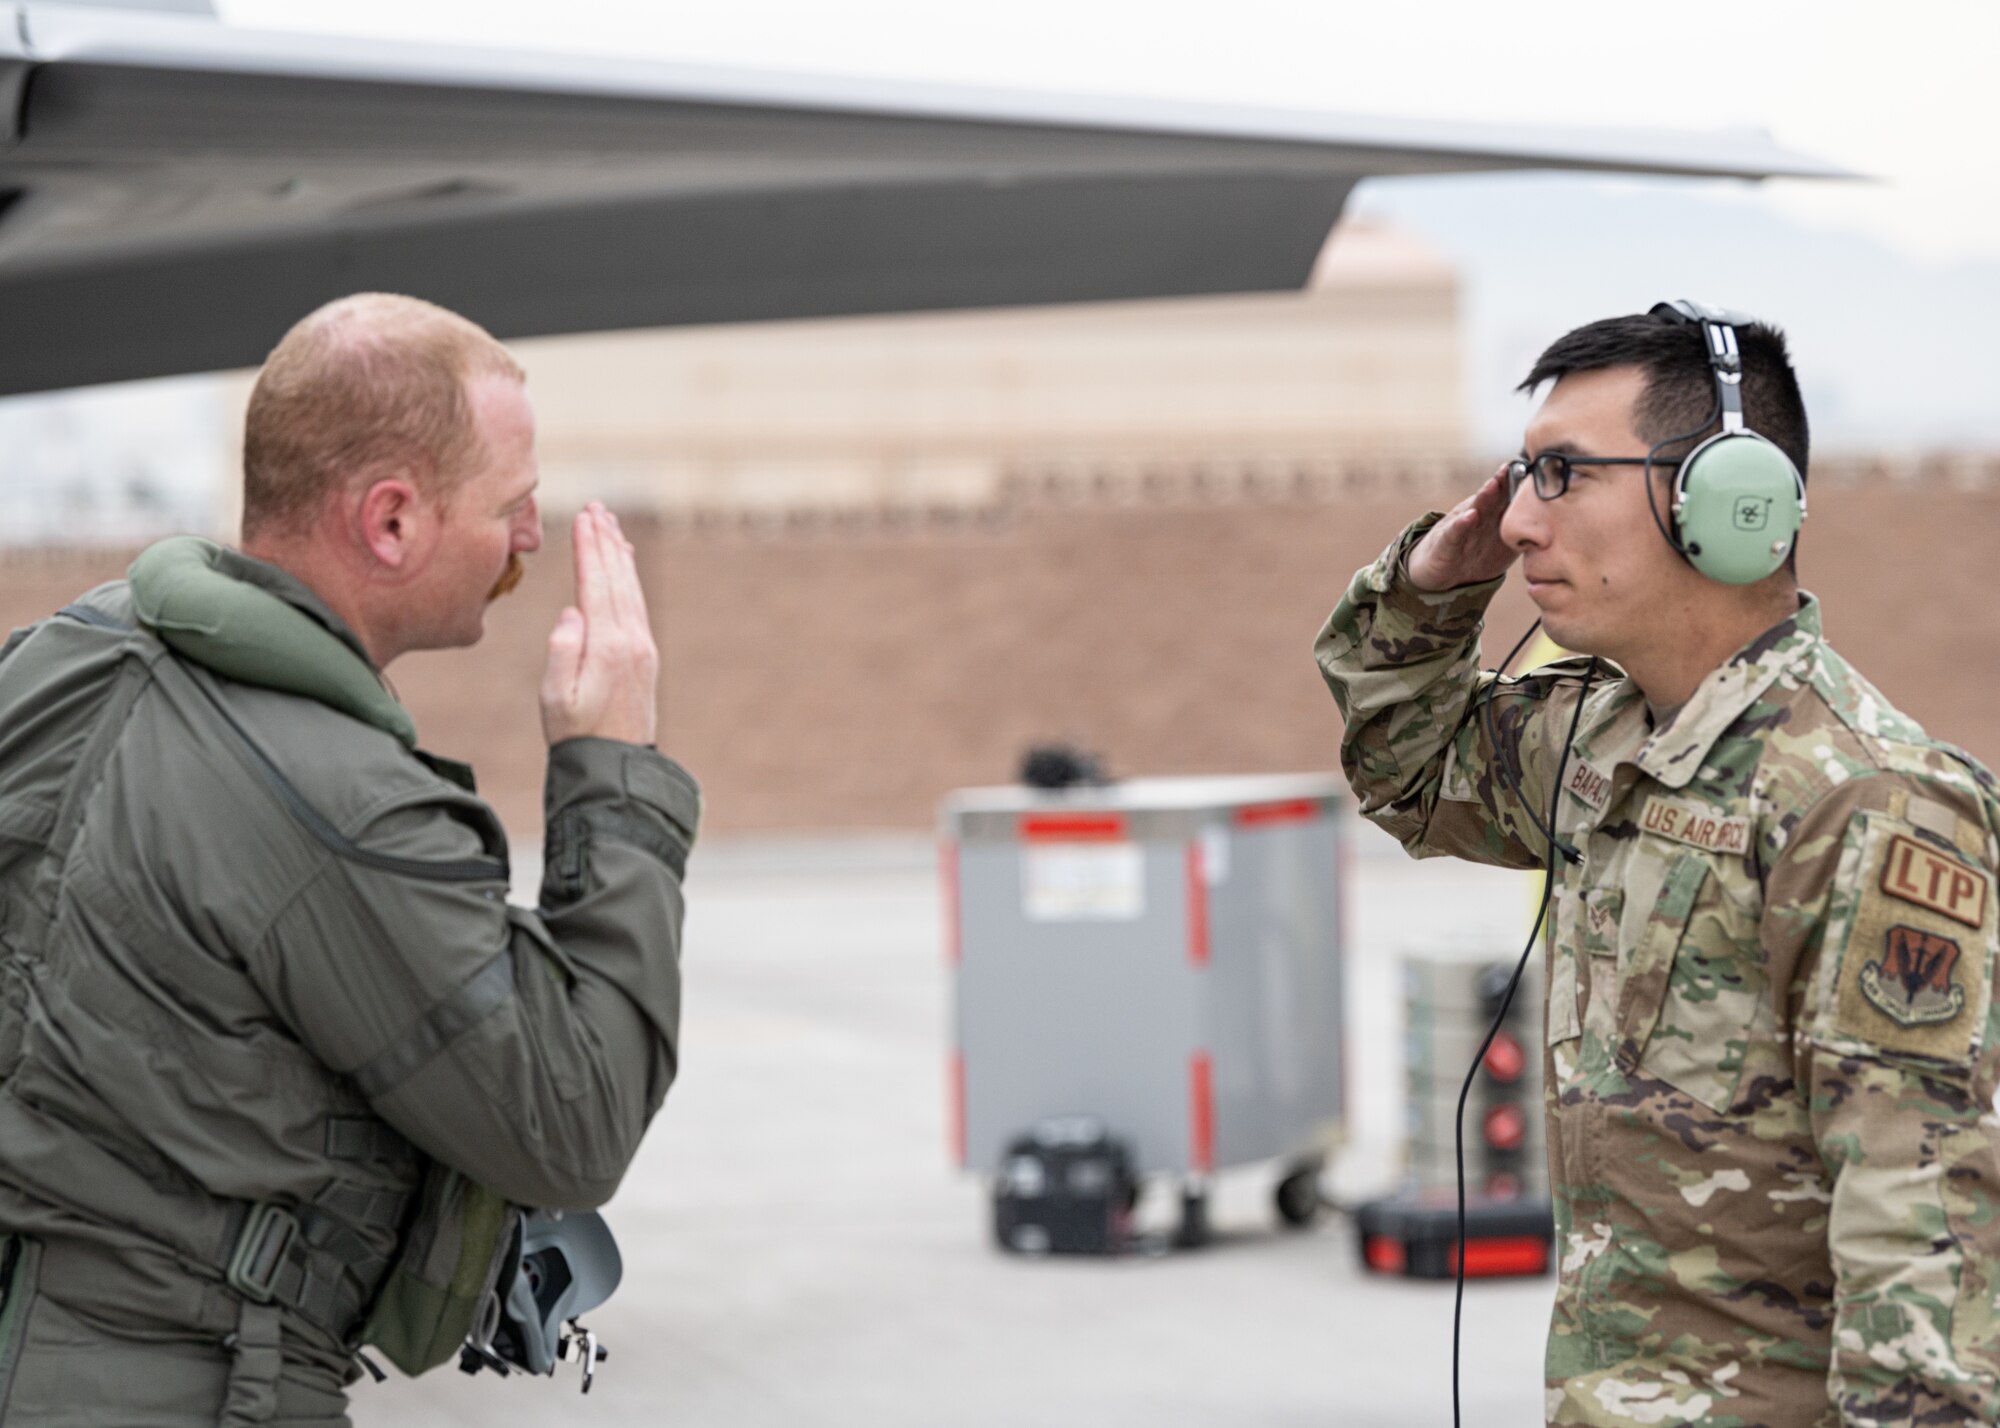 A photo of a maintainer and pilot saluting